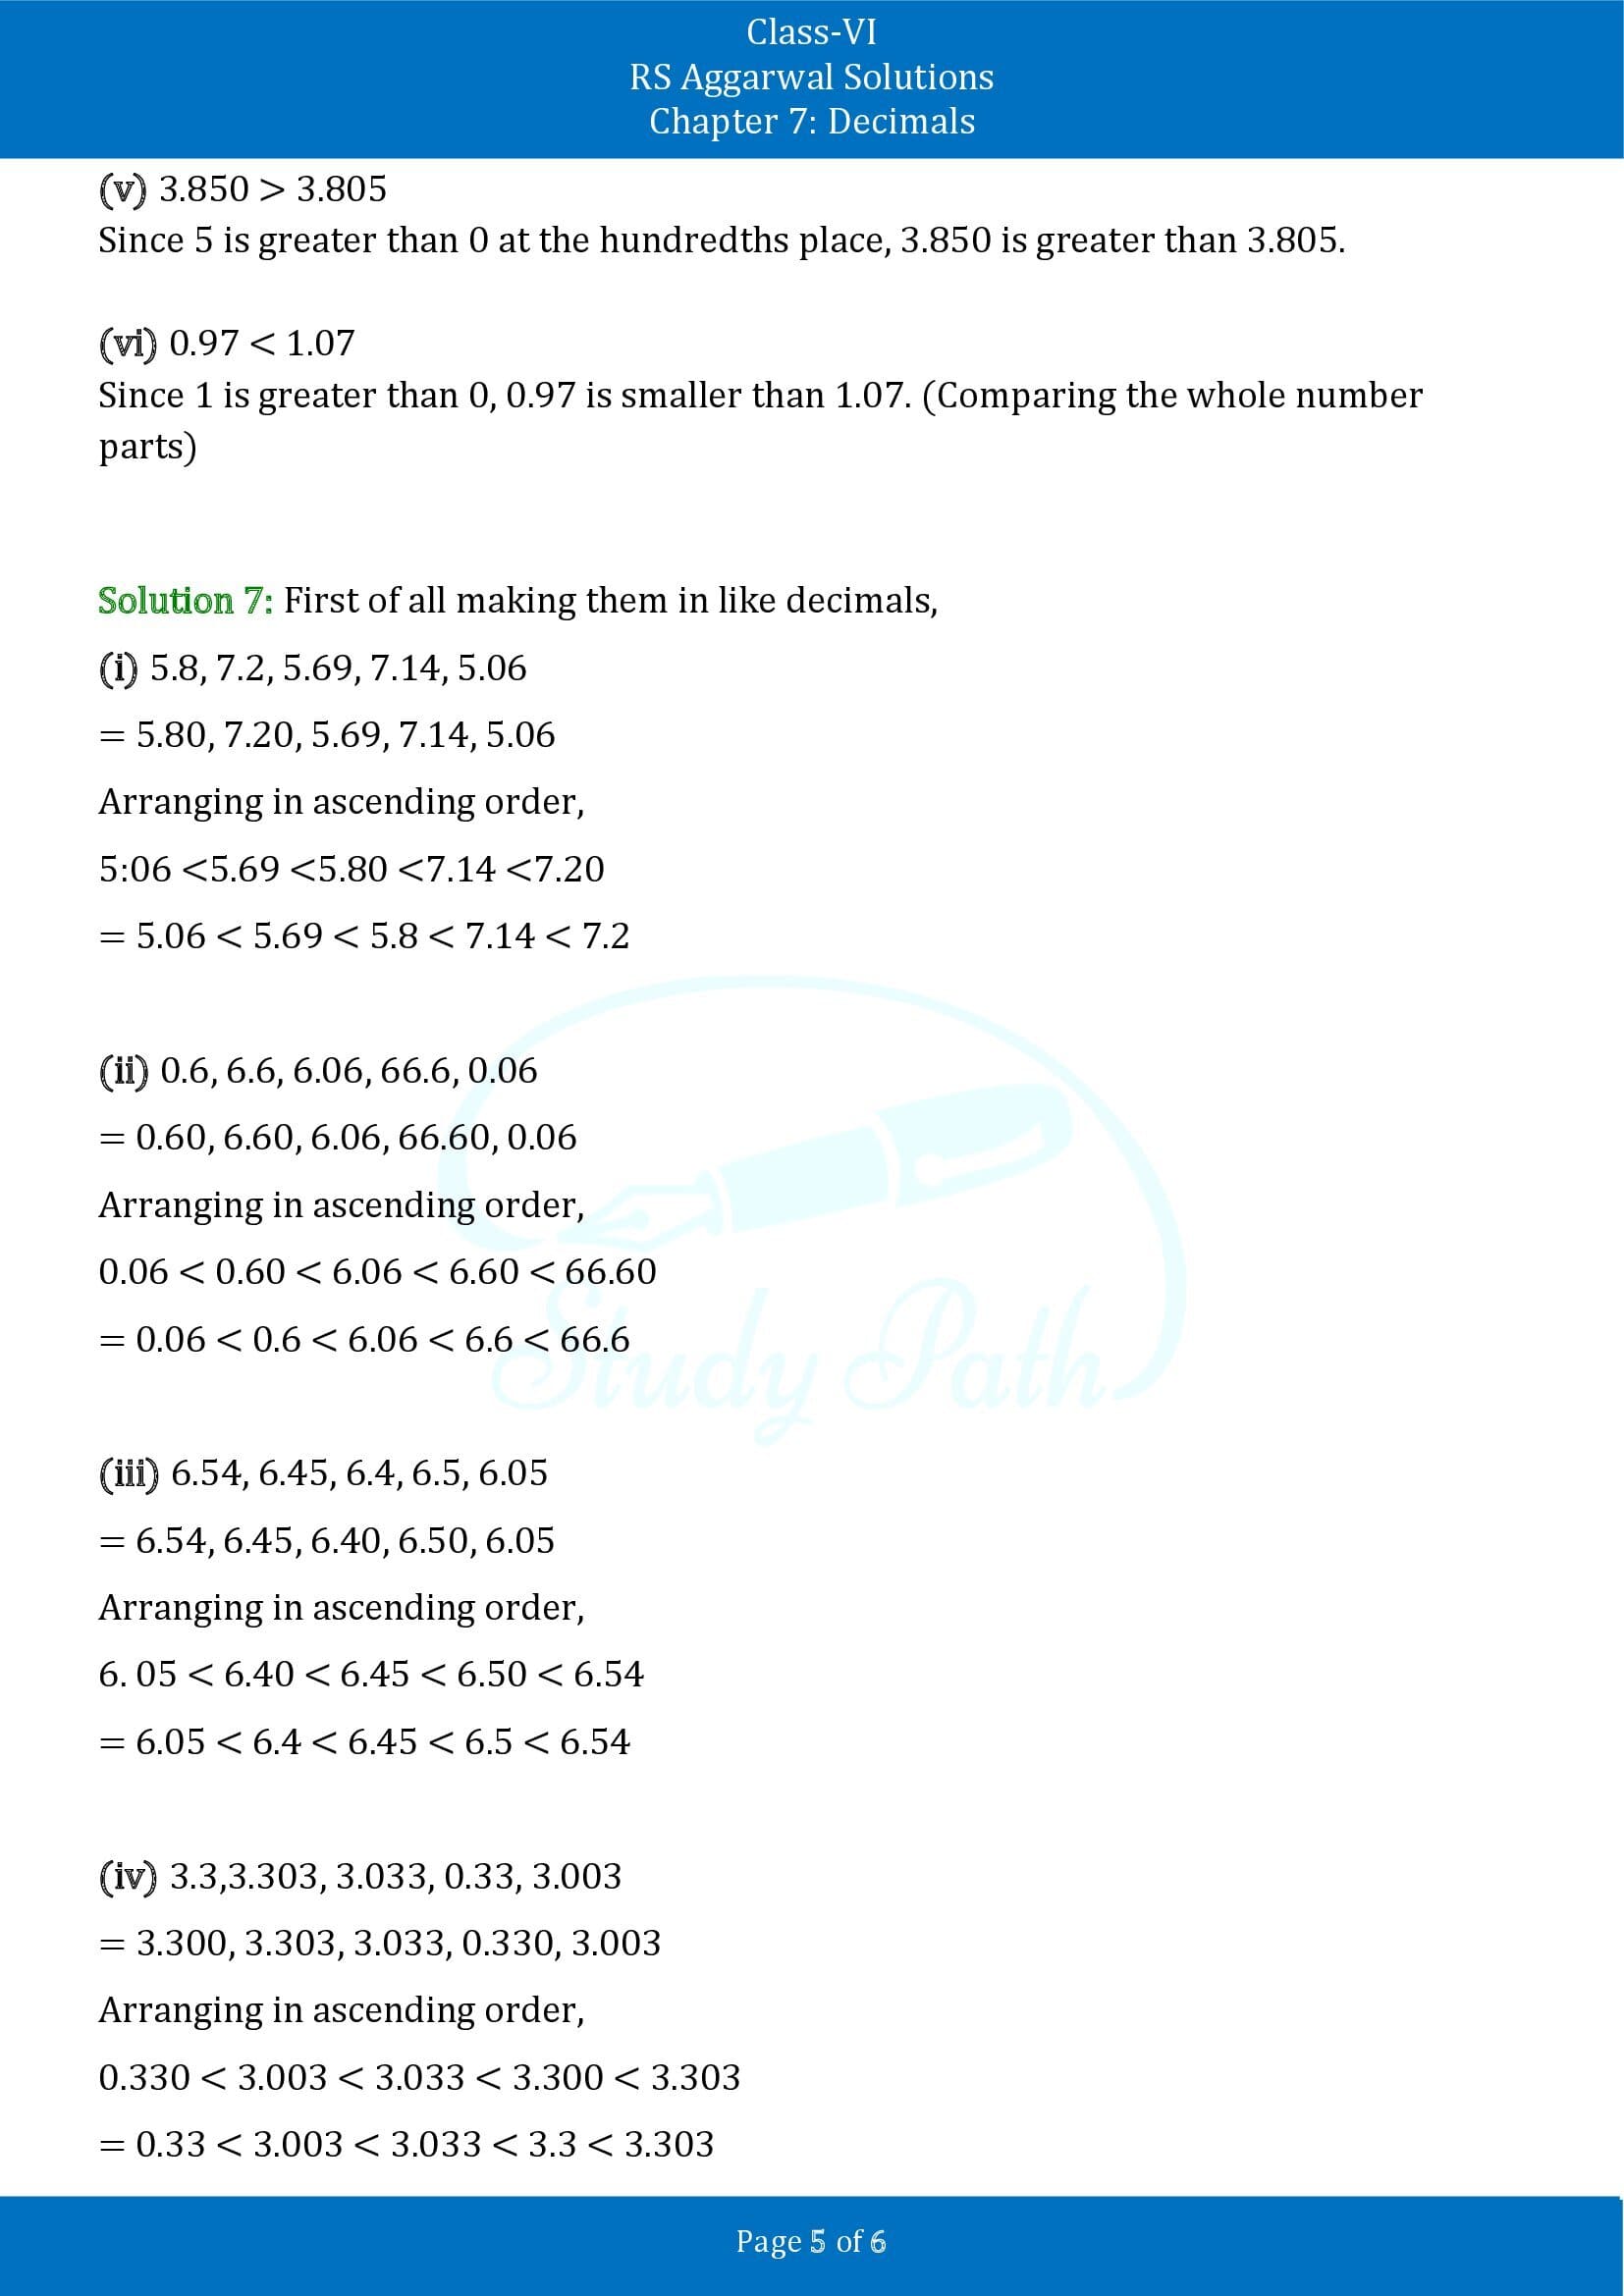 RS Aggarwal Solutions Class 6 Chapter 7 Decimals Exercise 7A 00005